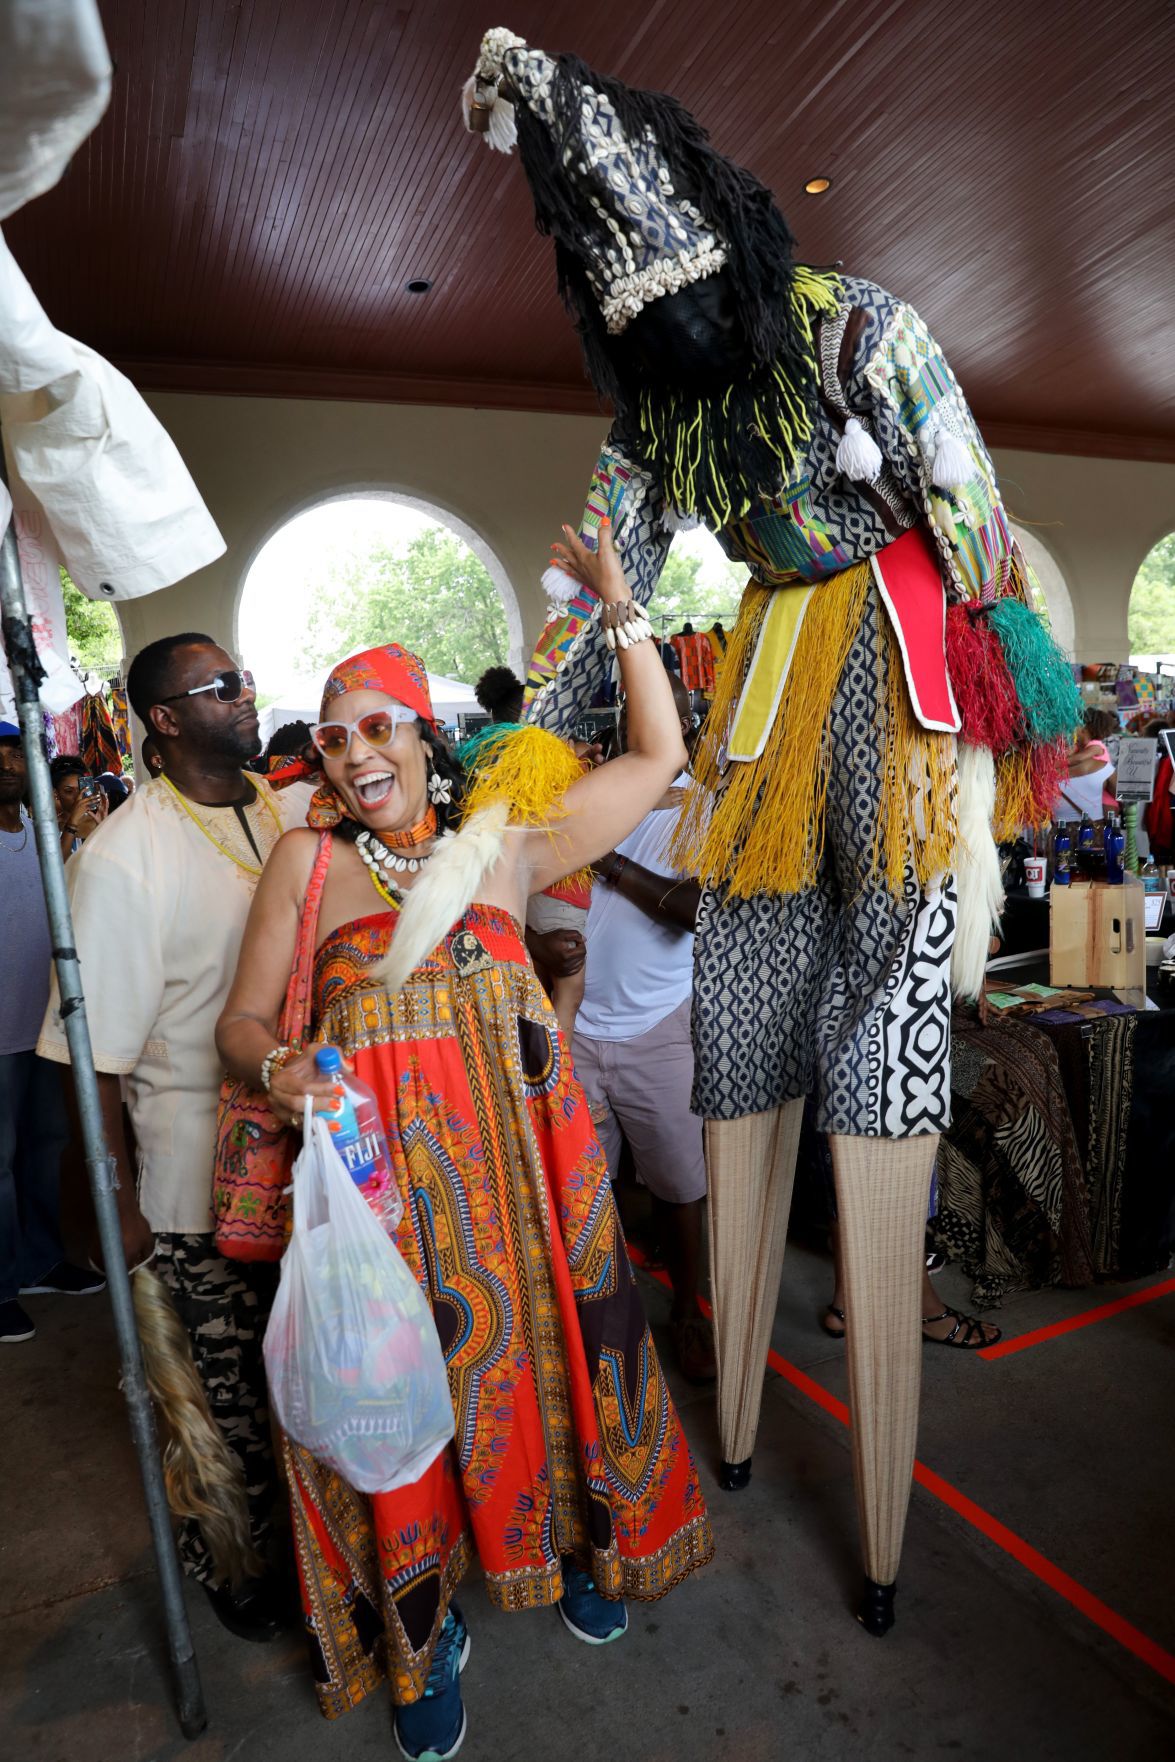 St. Louis African Arts Festival has a special focus on teenagers